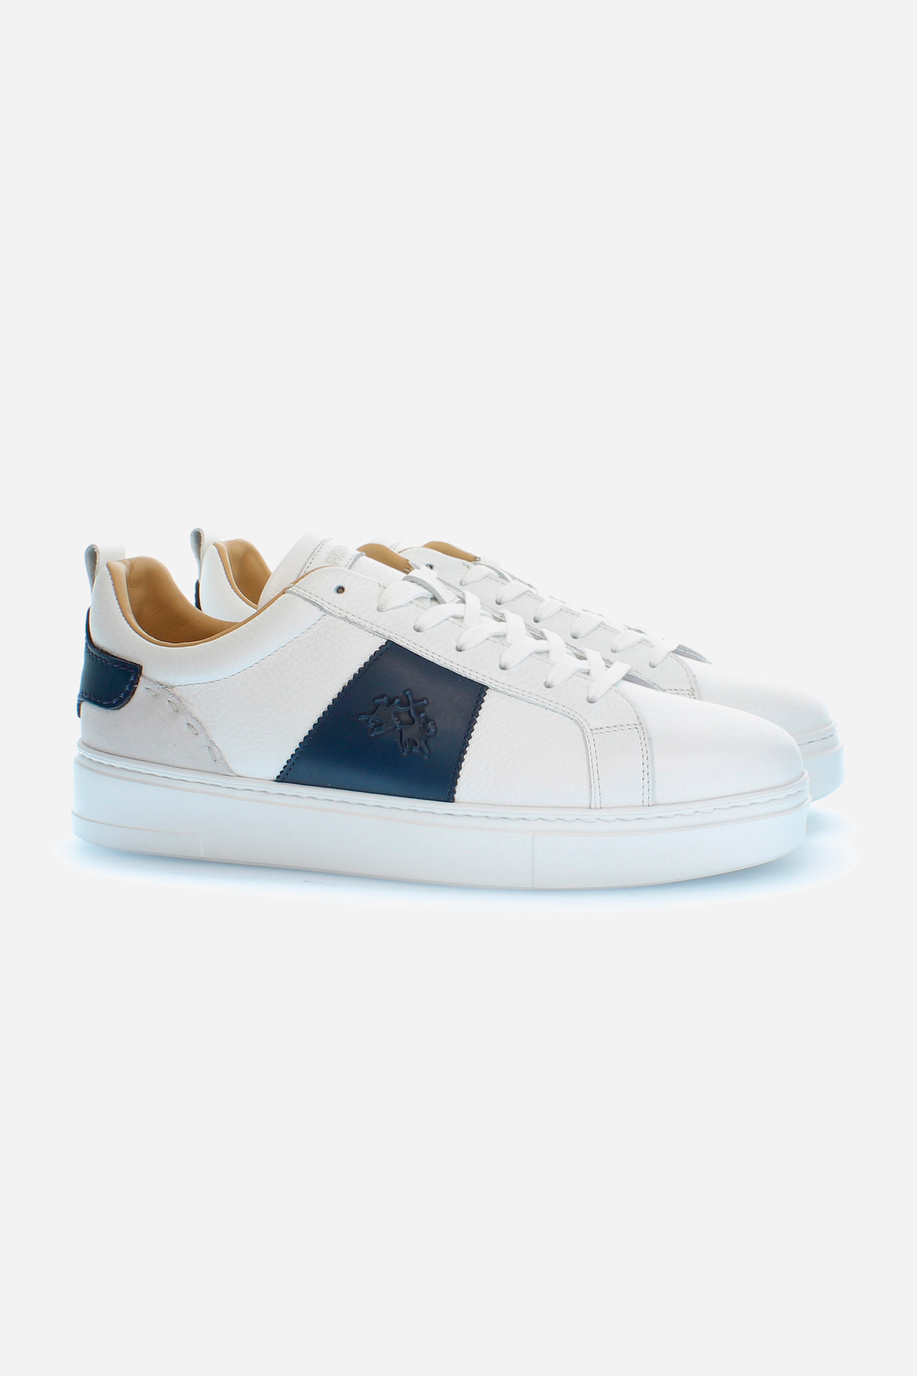 Men's trainers in leather and suede - Men | La Martina - Official Online Shop